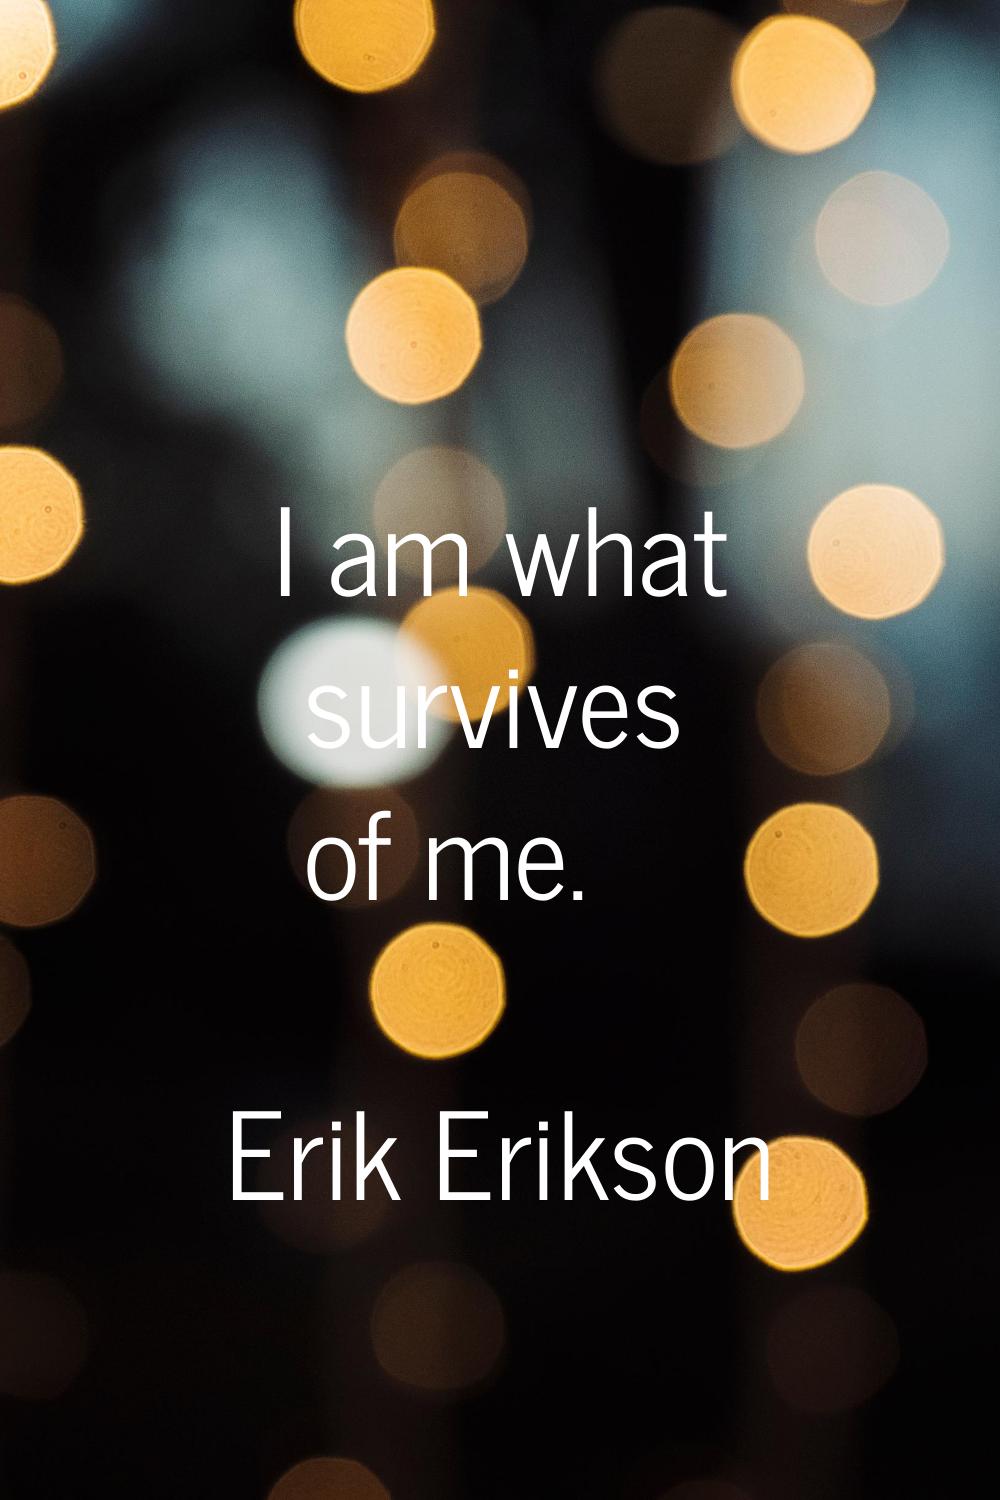 I am what survives of me.